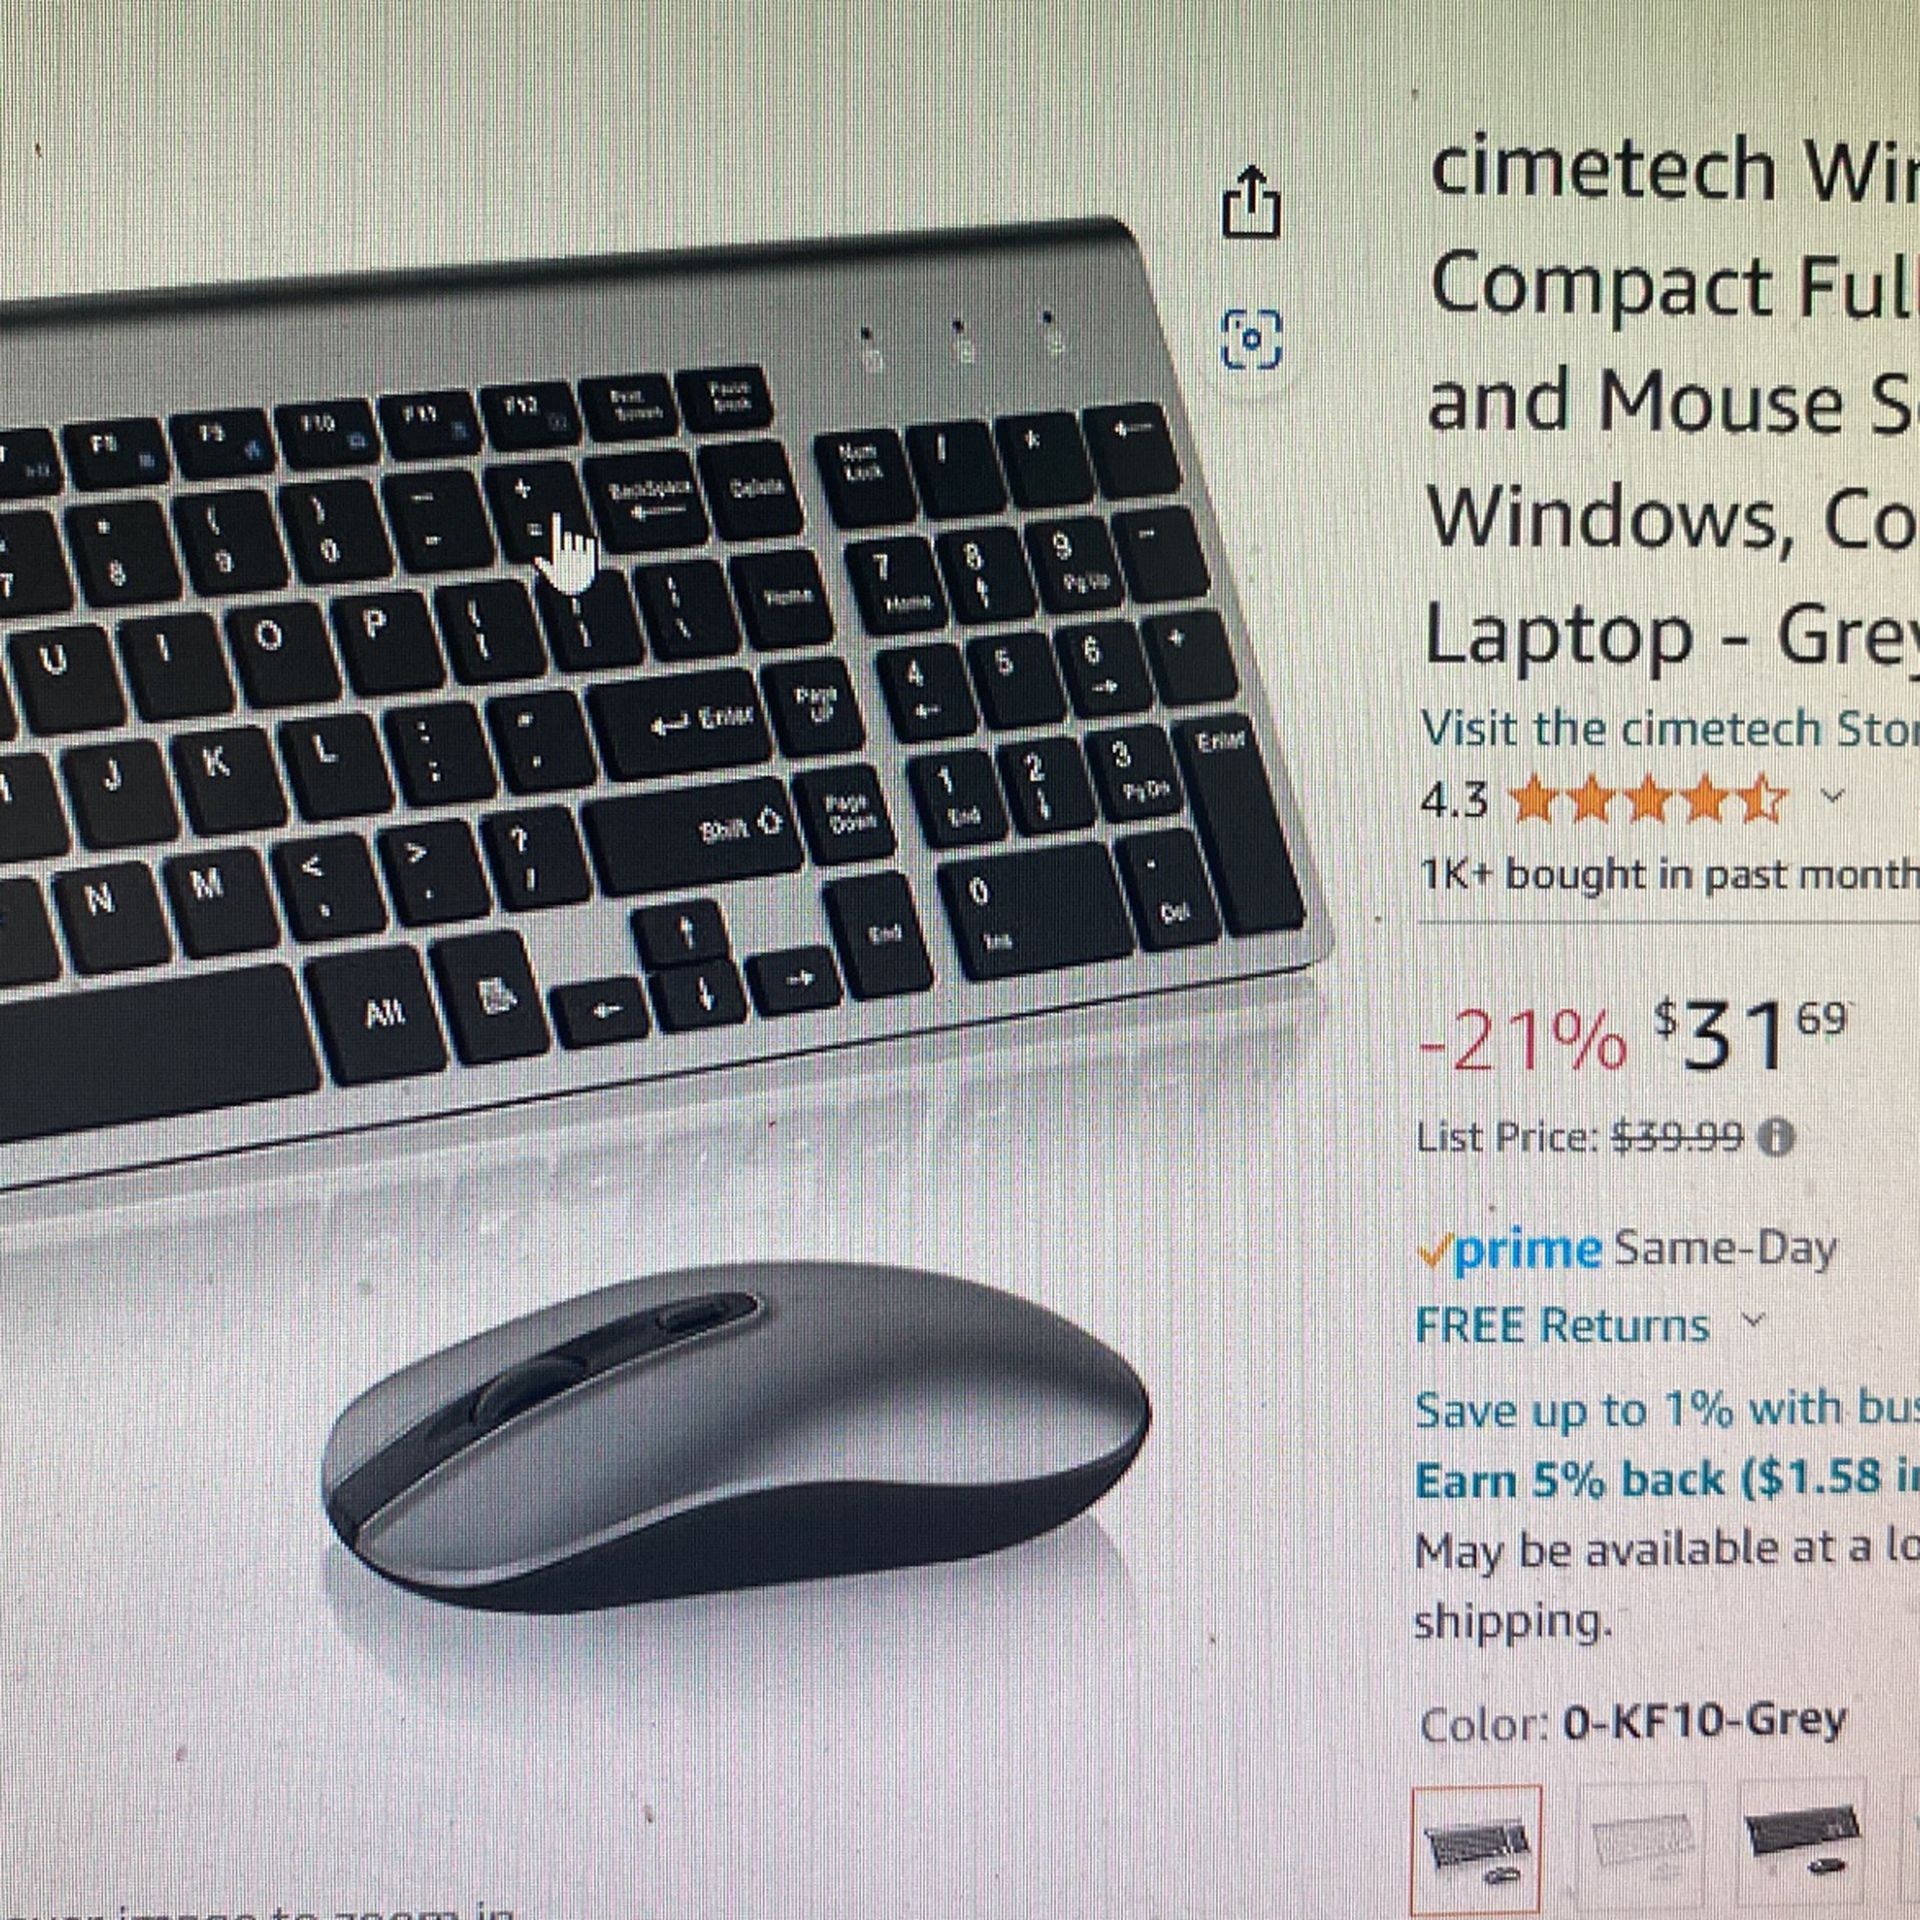 Cimetech Wireless Keyboard And Mouse